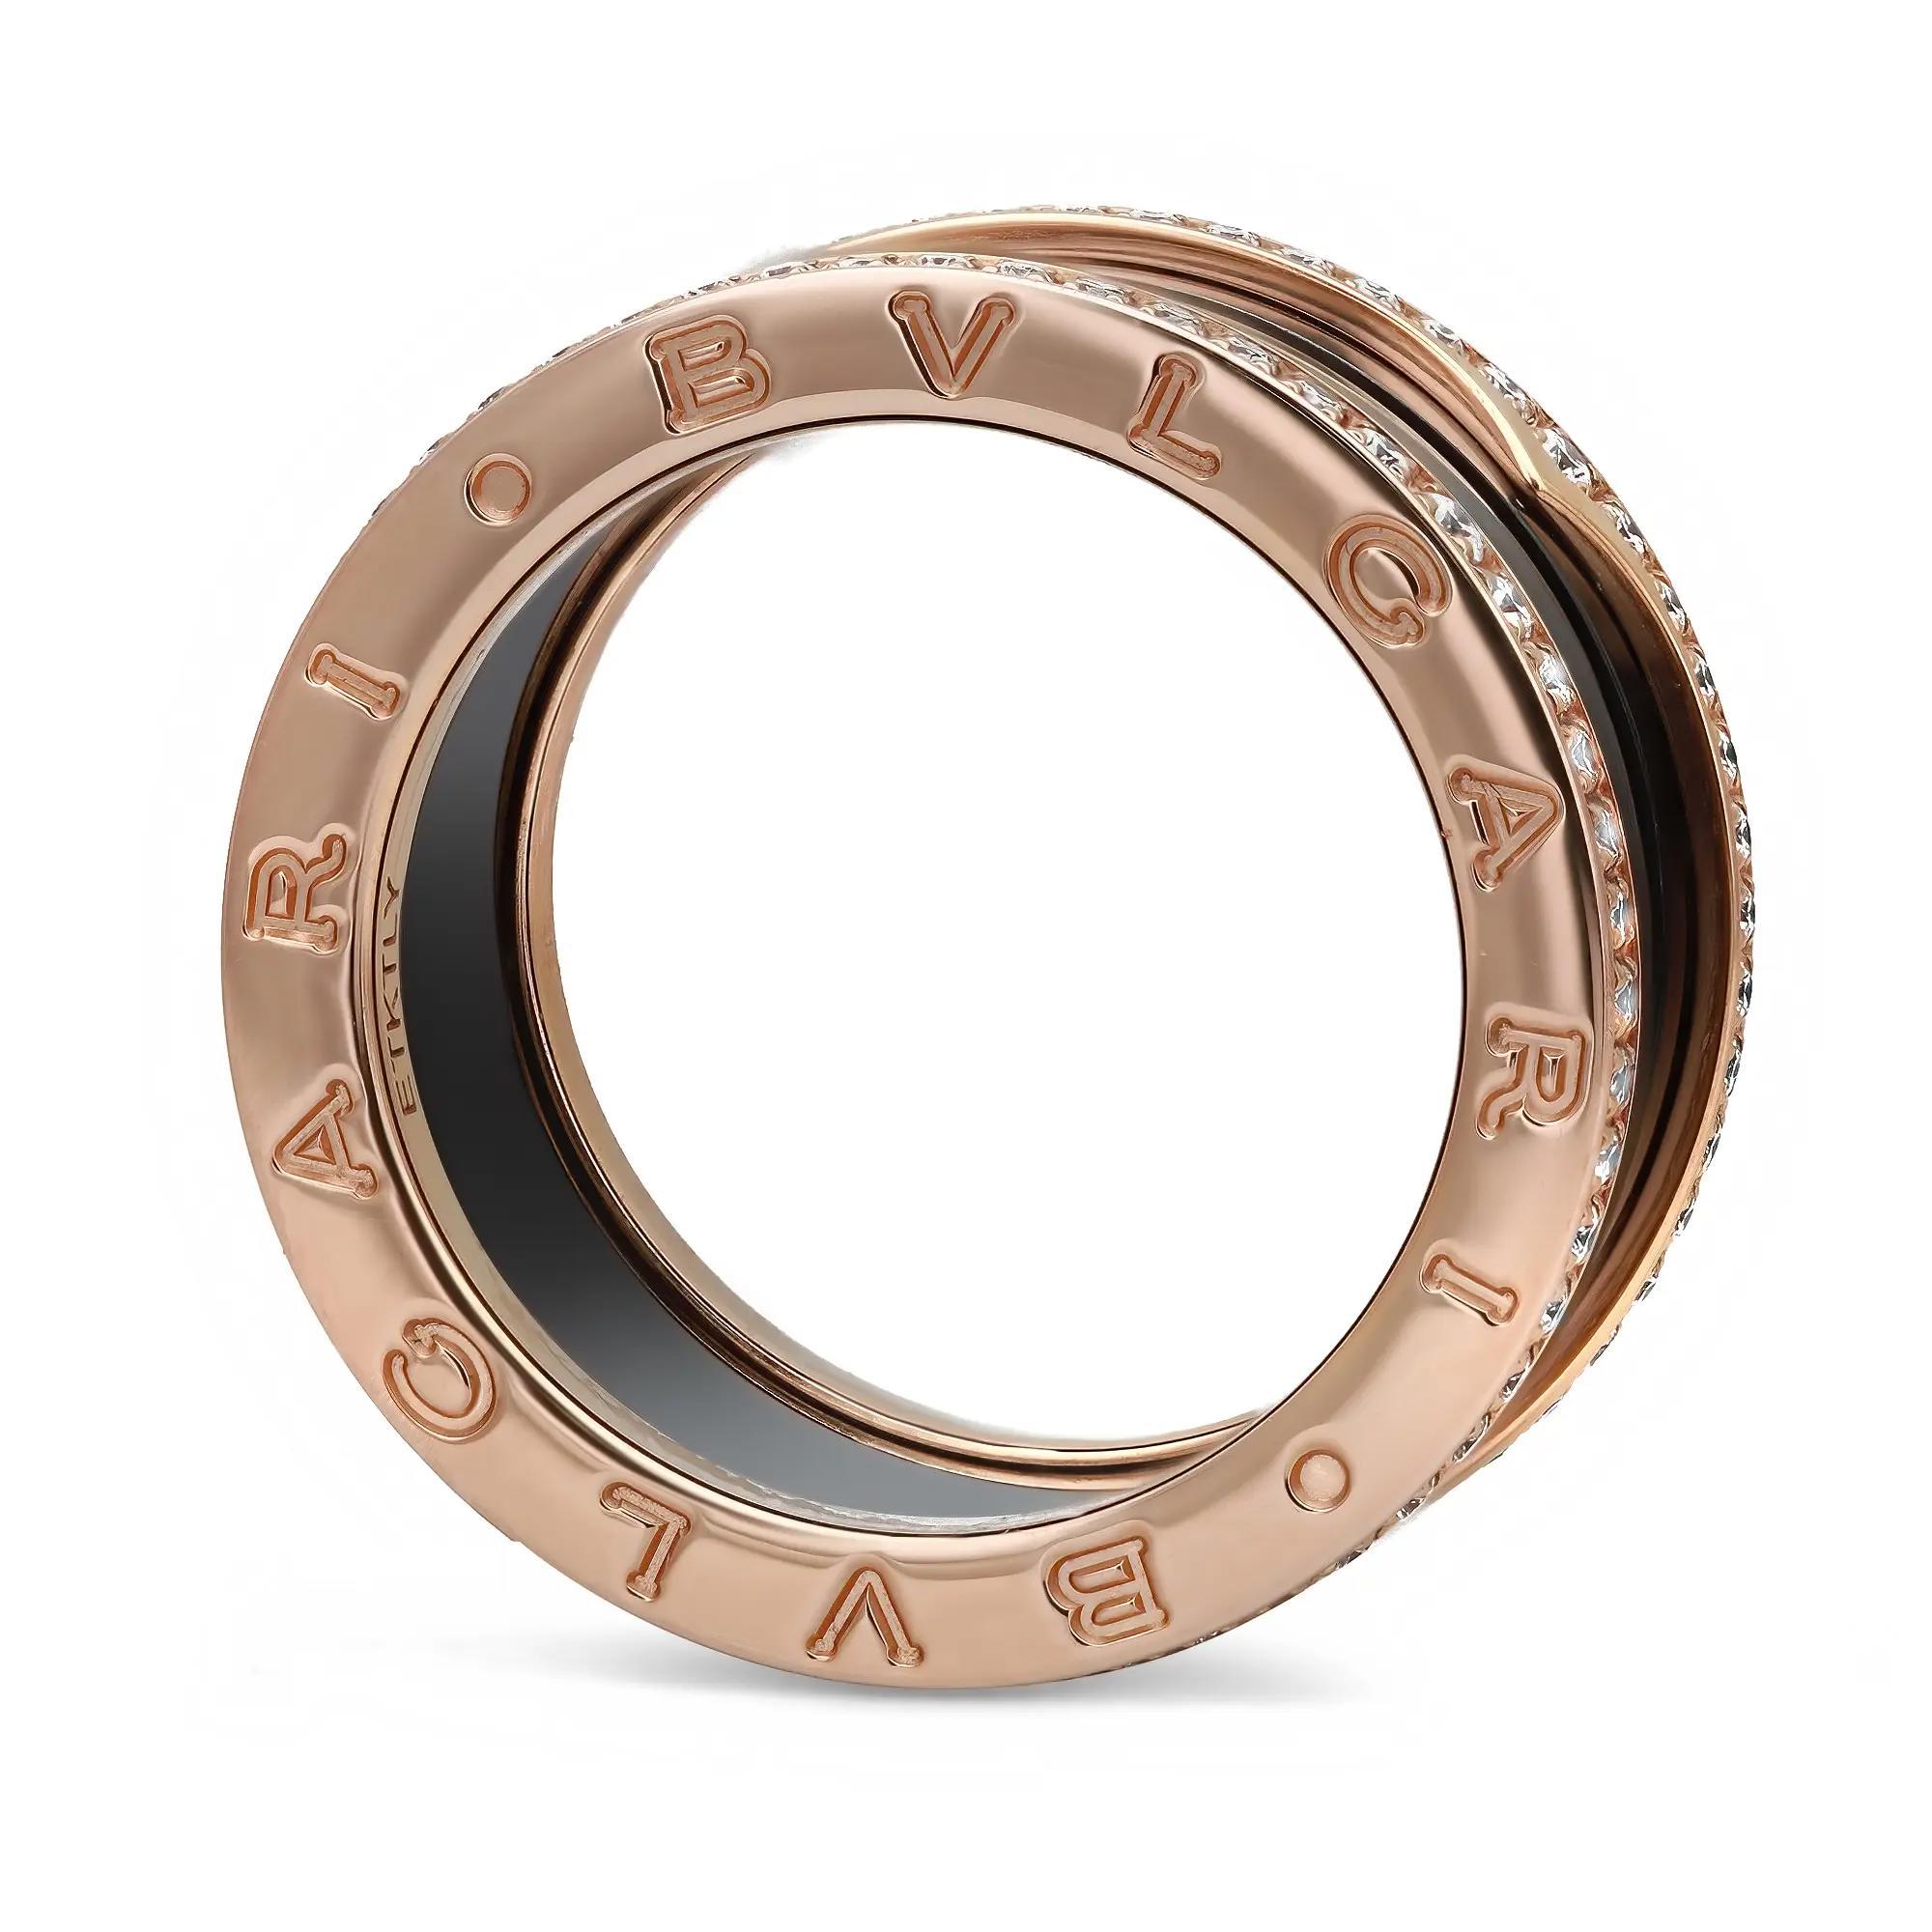 From the Bvlgari B.zero1 collection, this beautiful four-band ring is crafted in a lustrous 18K rose gold. It features a distinctive four-band spiral ring with pavé set round brilliant cut diamonds on the rims with the BVLGARI logo engraved on both